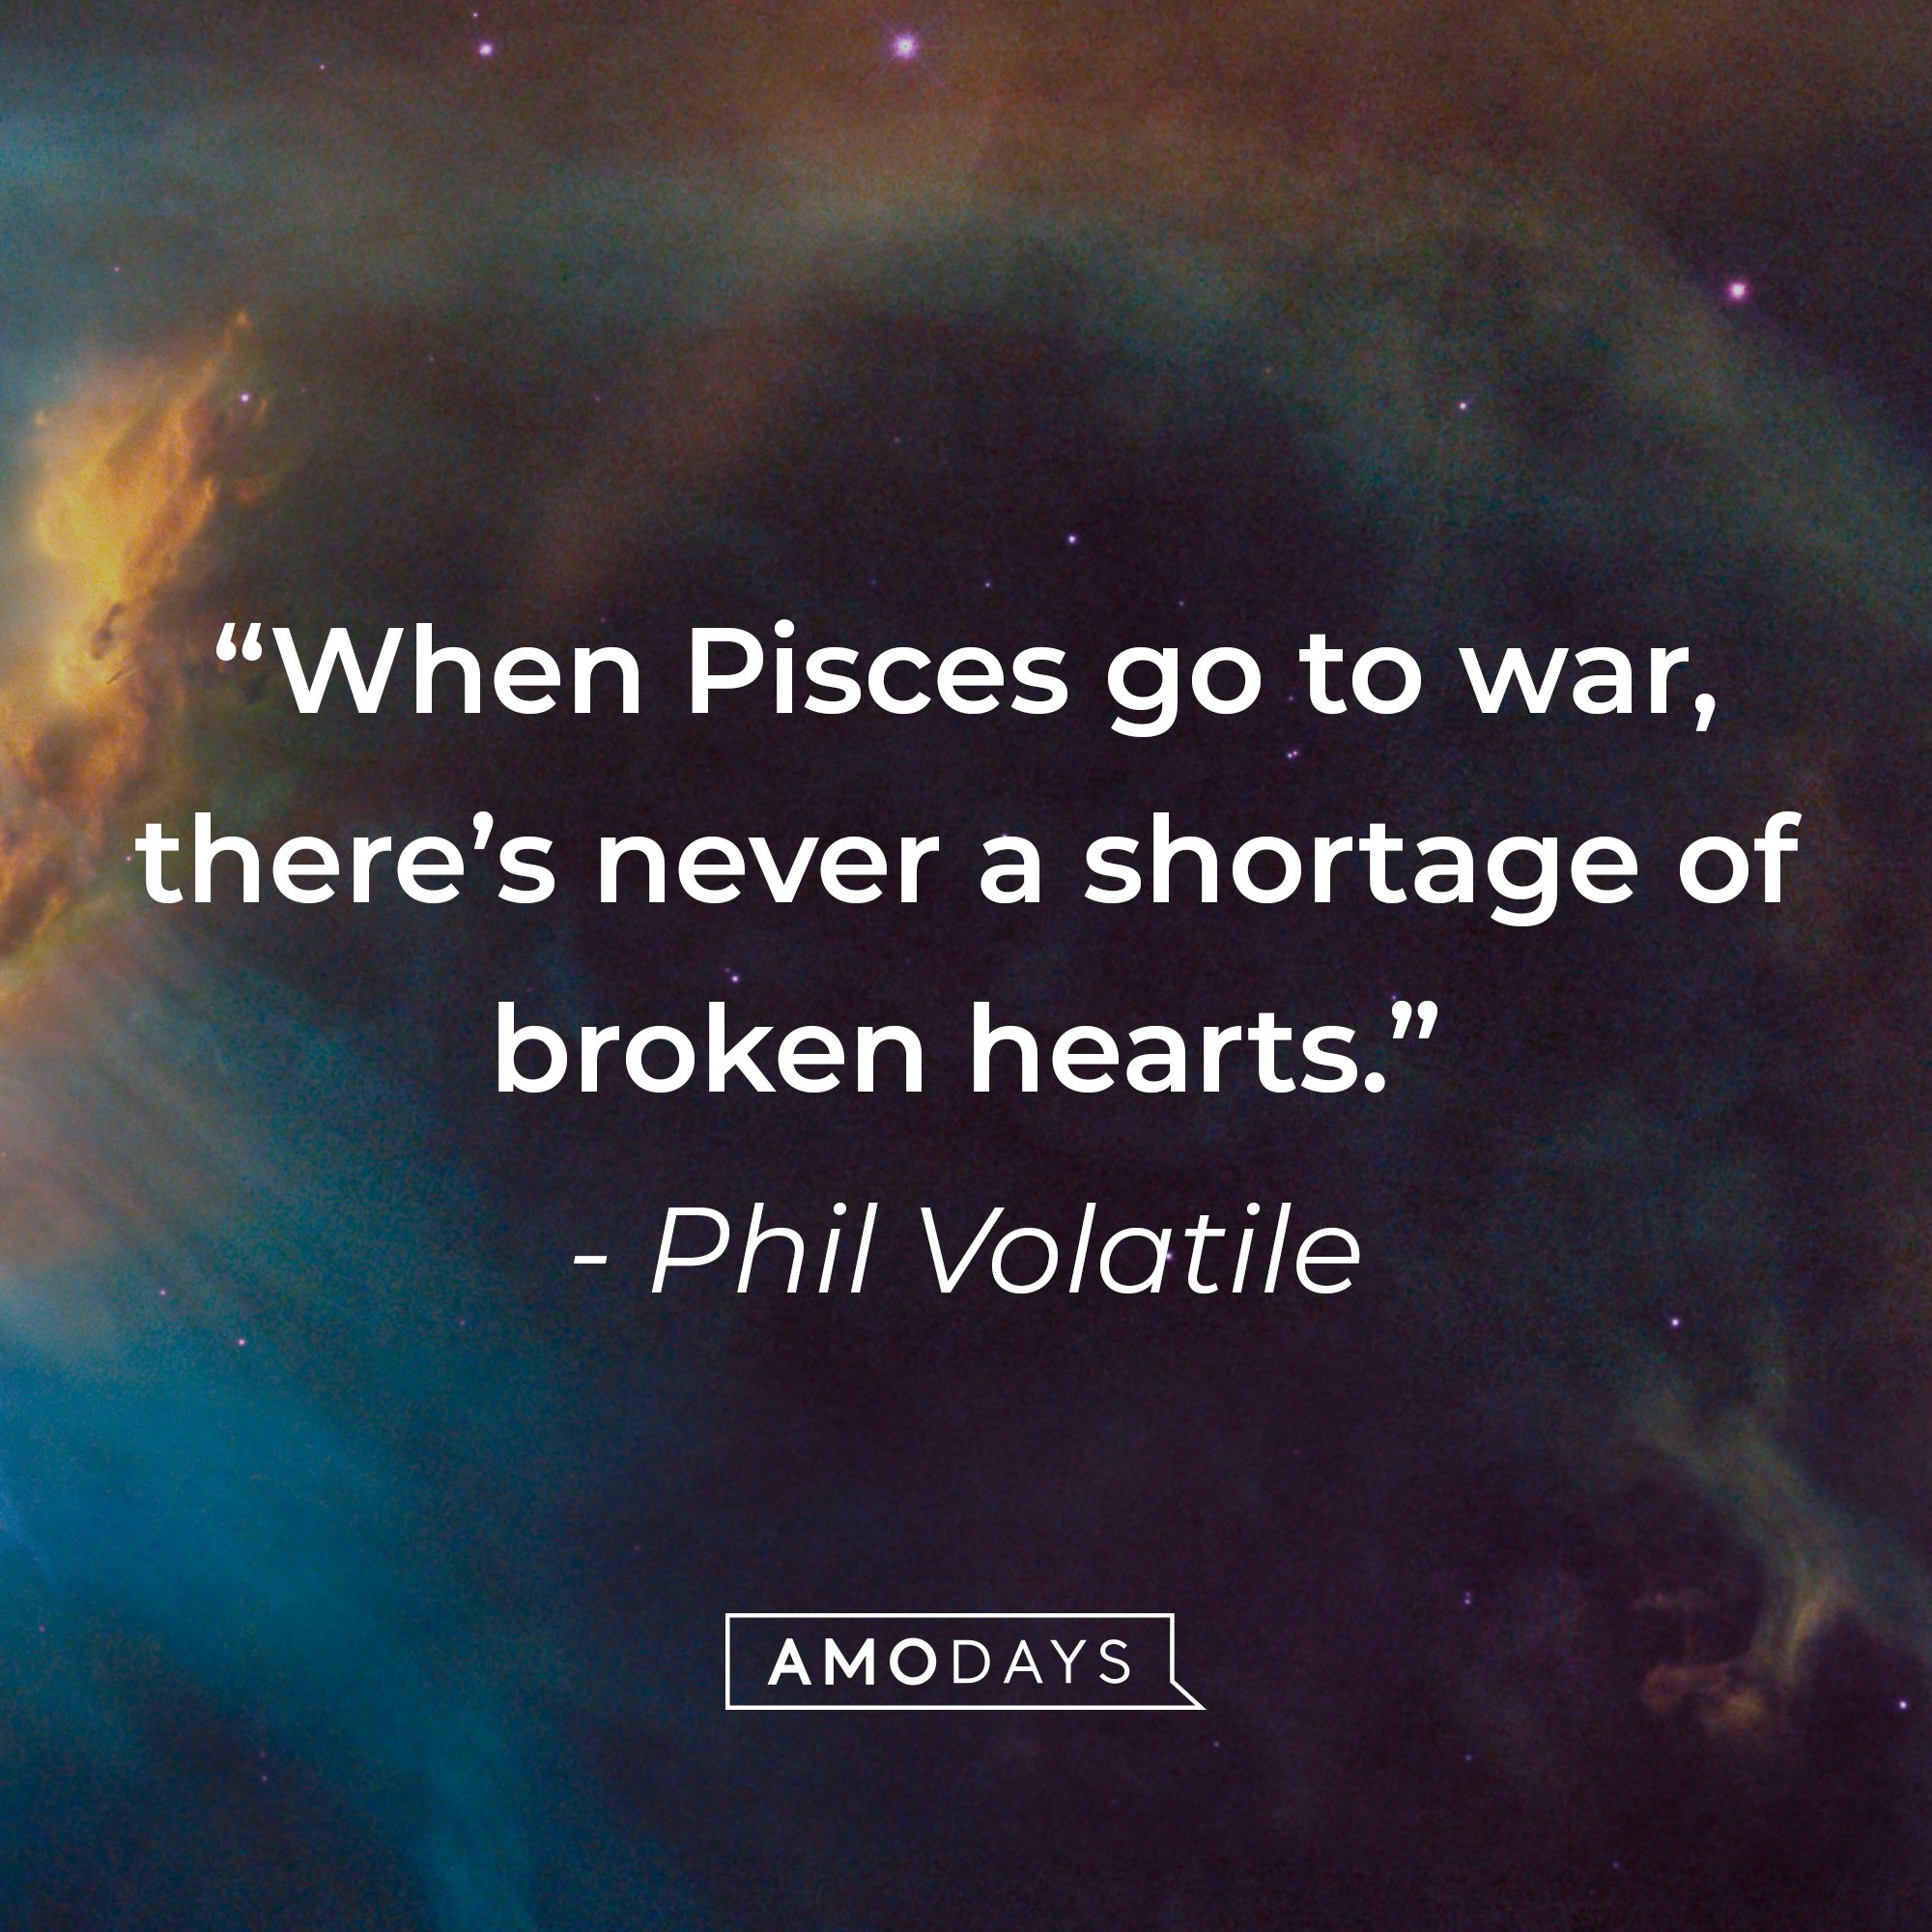 Phil Volatile's quote: "When Pisces go to war, there's never a shortage of broken hearts." | Image: AmoDays